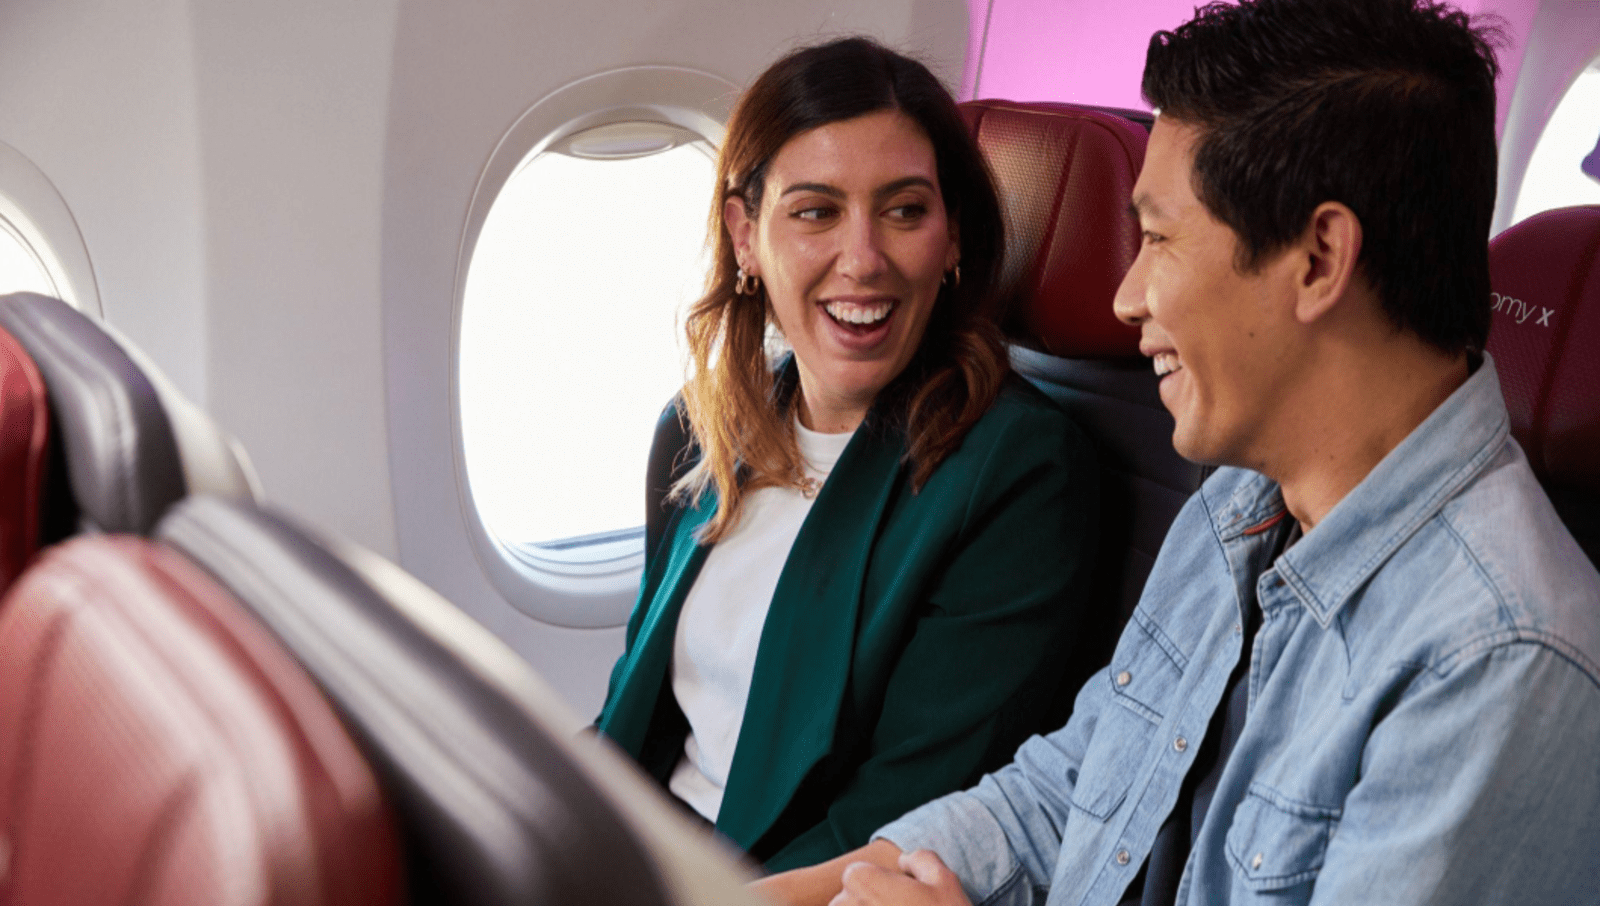 two people sitting on plane smiling at each other